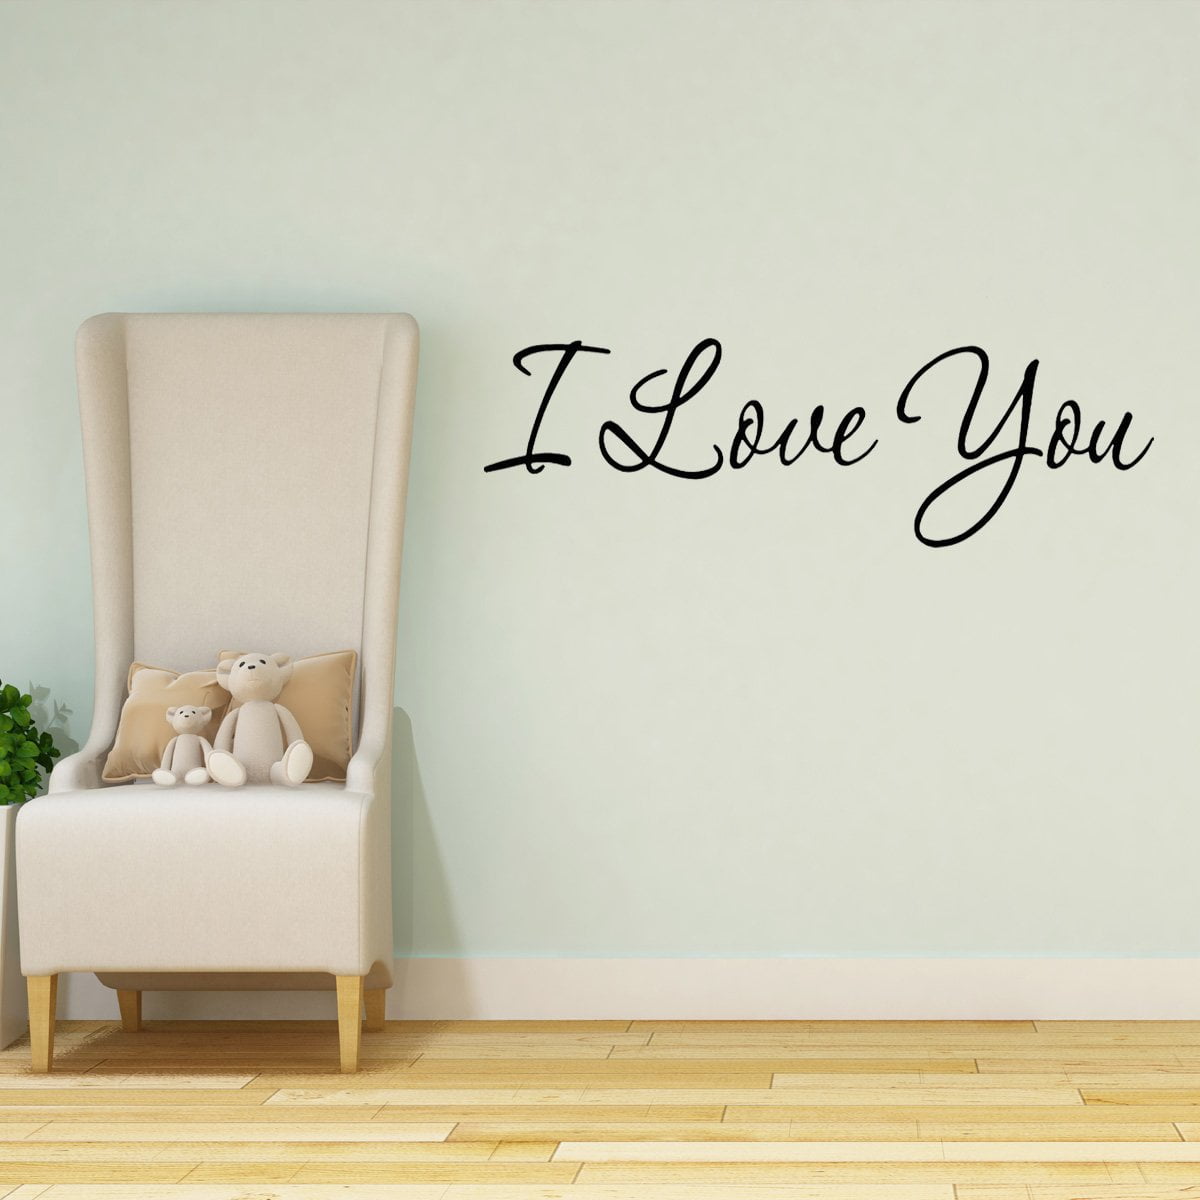 I'LL LOVE YOU FOREVER Nursery Baby Quote Vinyl Wall Decal Decor Letters Sticker 